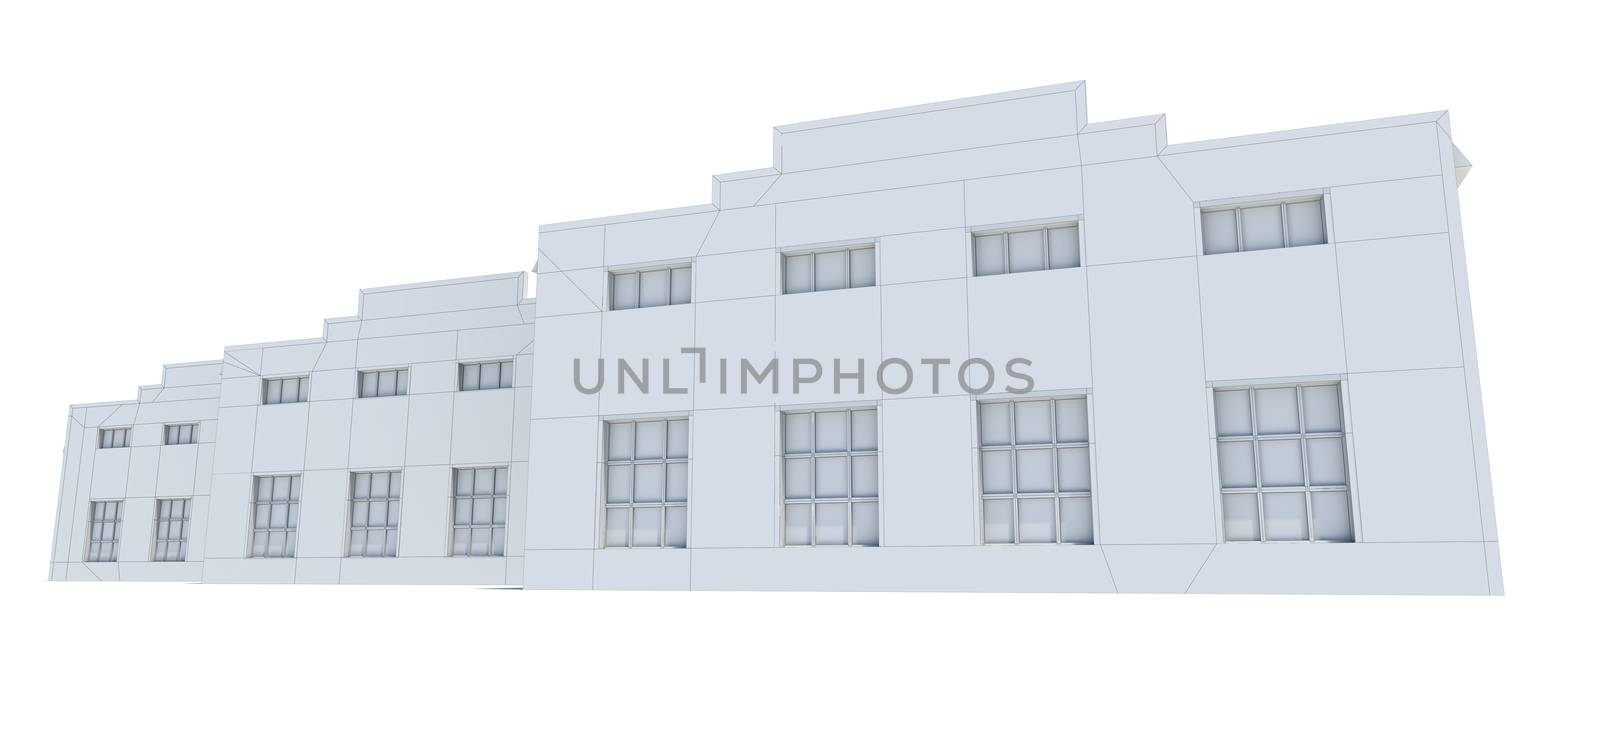 Hangar building. White wire-frame by cherezoff